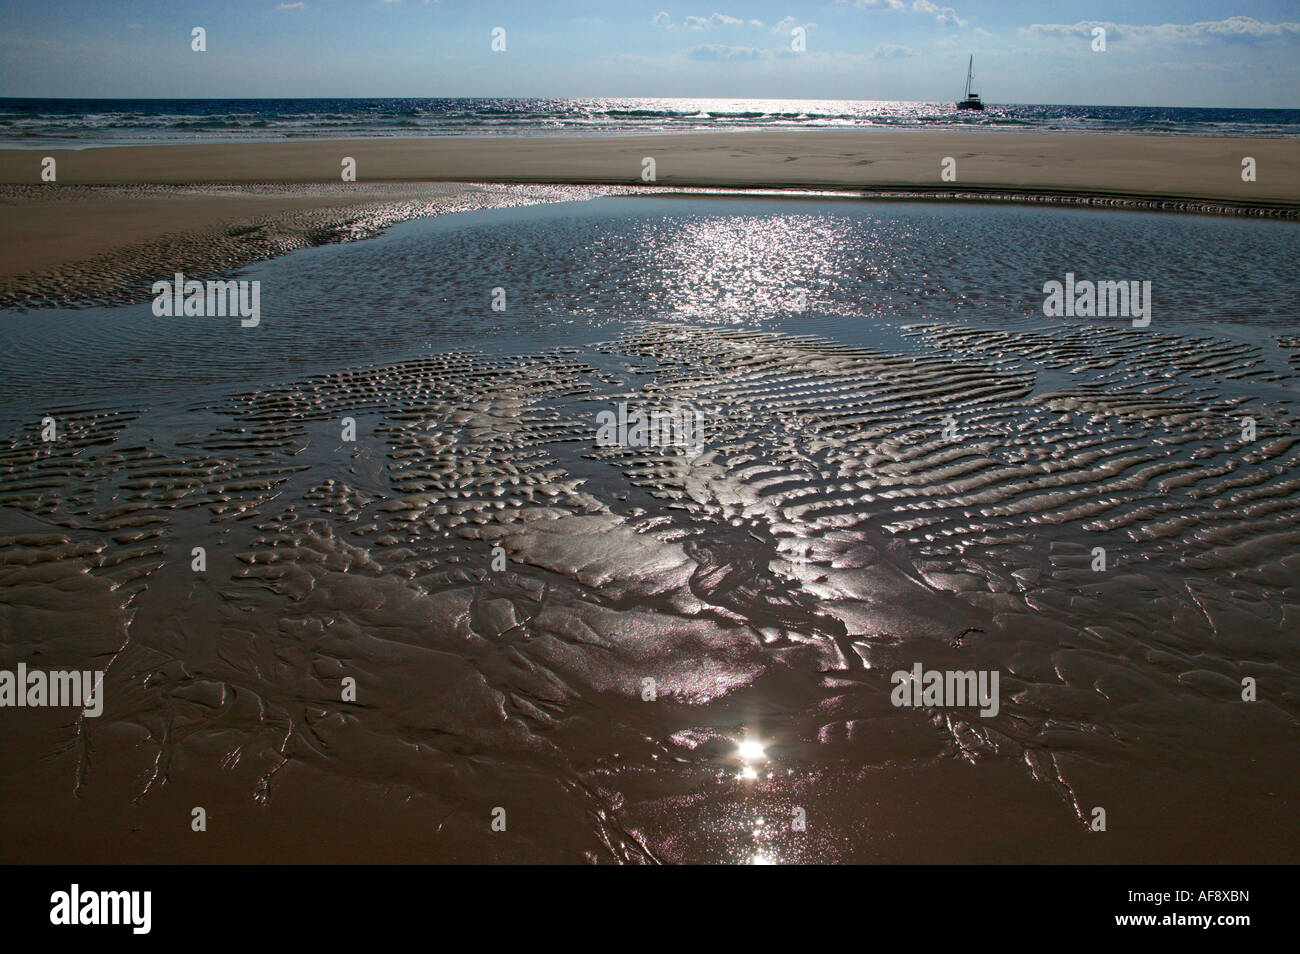 Beach scene with sand ripples and a yacht moored out at sea in the distance Stock Photo